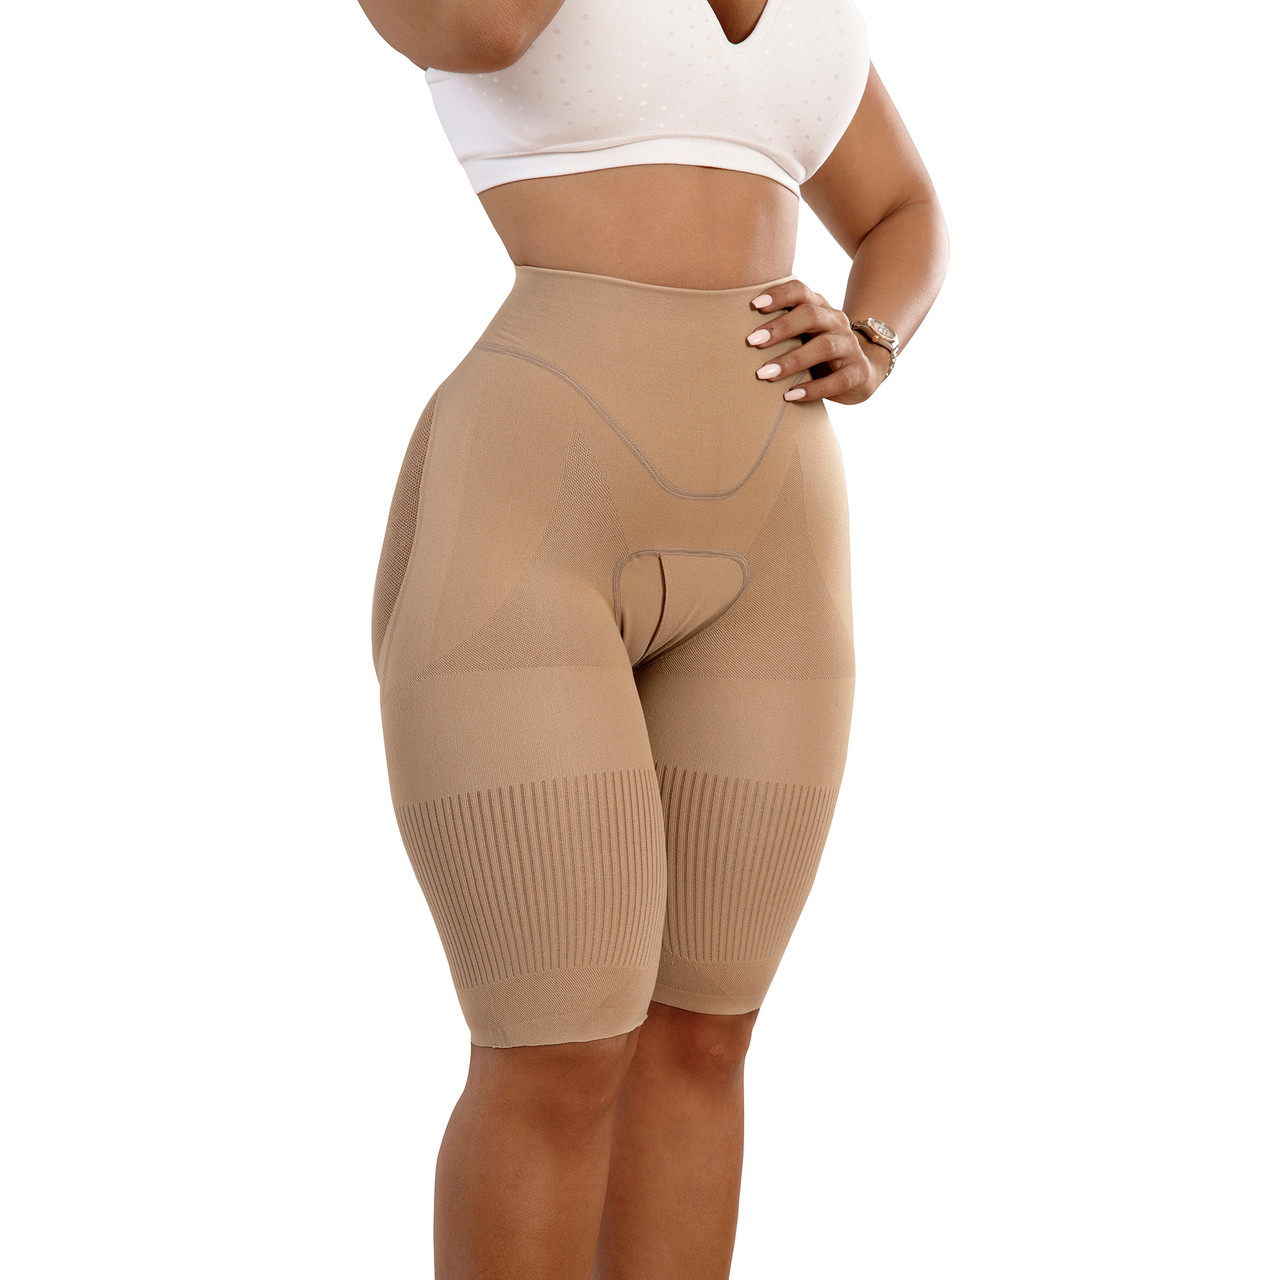 How Shop Yahaira Is Creating Shapewear Made for More Than Just the  Stereotypical Body Type